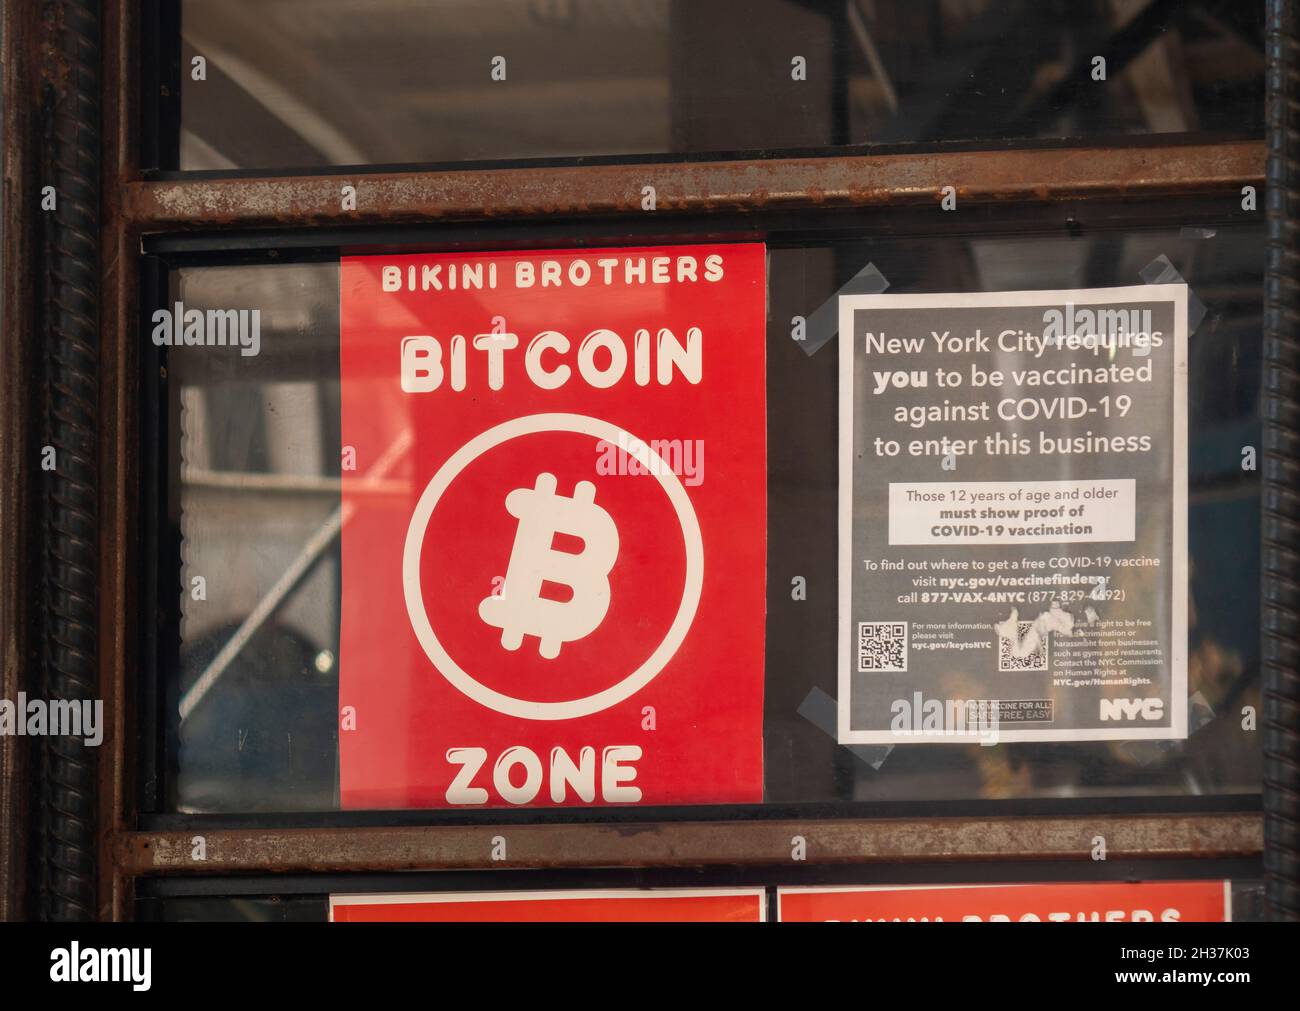 A sign promoting Bitcoin is displayed in the window of a bar in New York on Thursday, October 7, 2021.  (© Richard B. Levine) Stock Photo